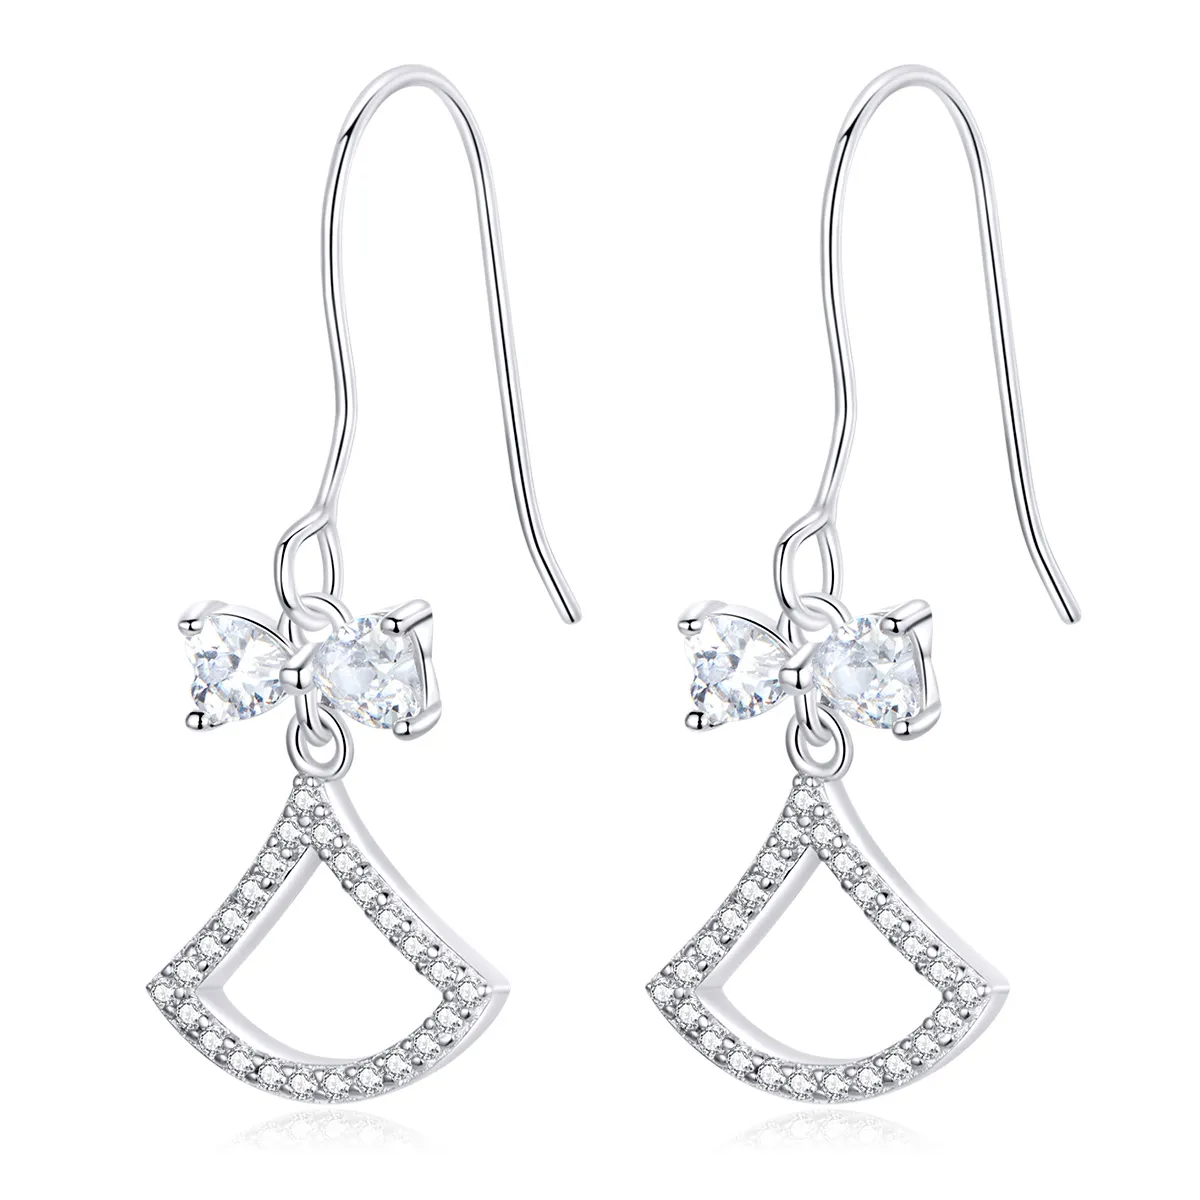 Pandora Style Bow Scalloped Hanging Earrings - BSE281